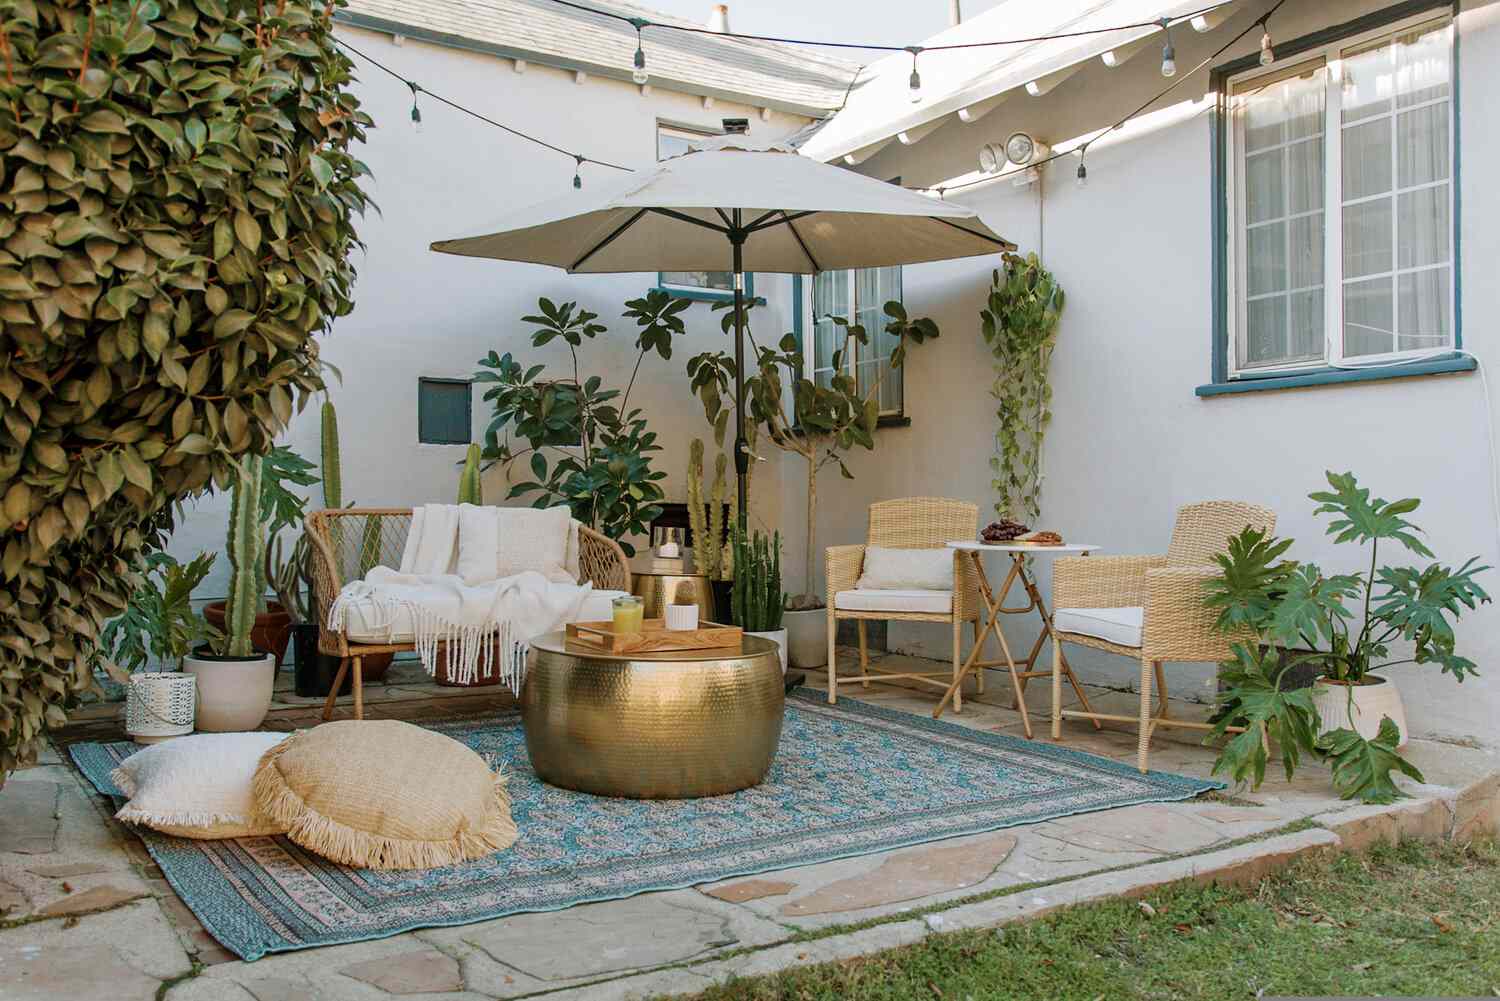 outdoor patio with large umbrella, woven chairs, and a teal outdoor rug